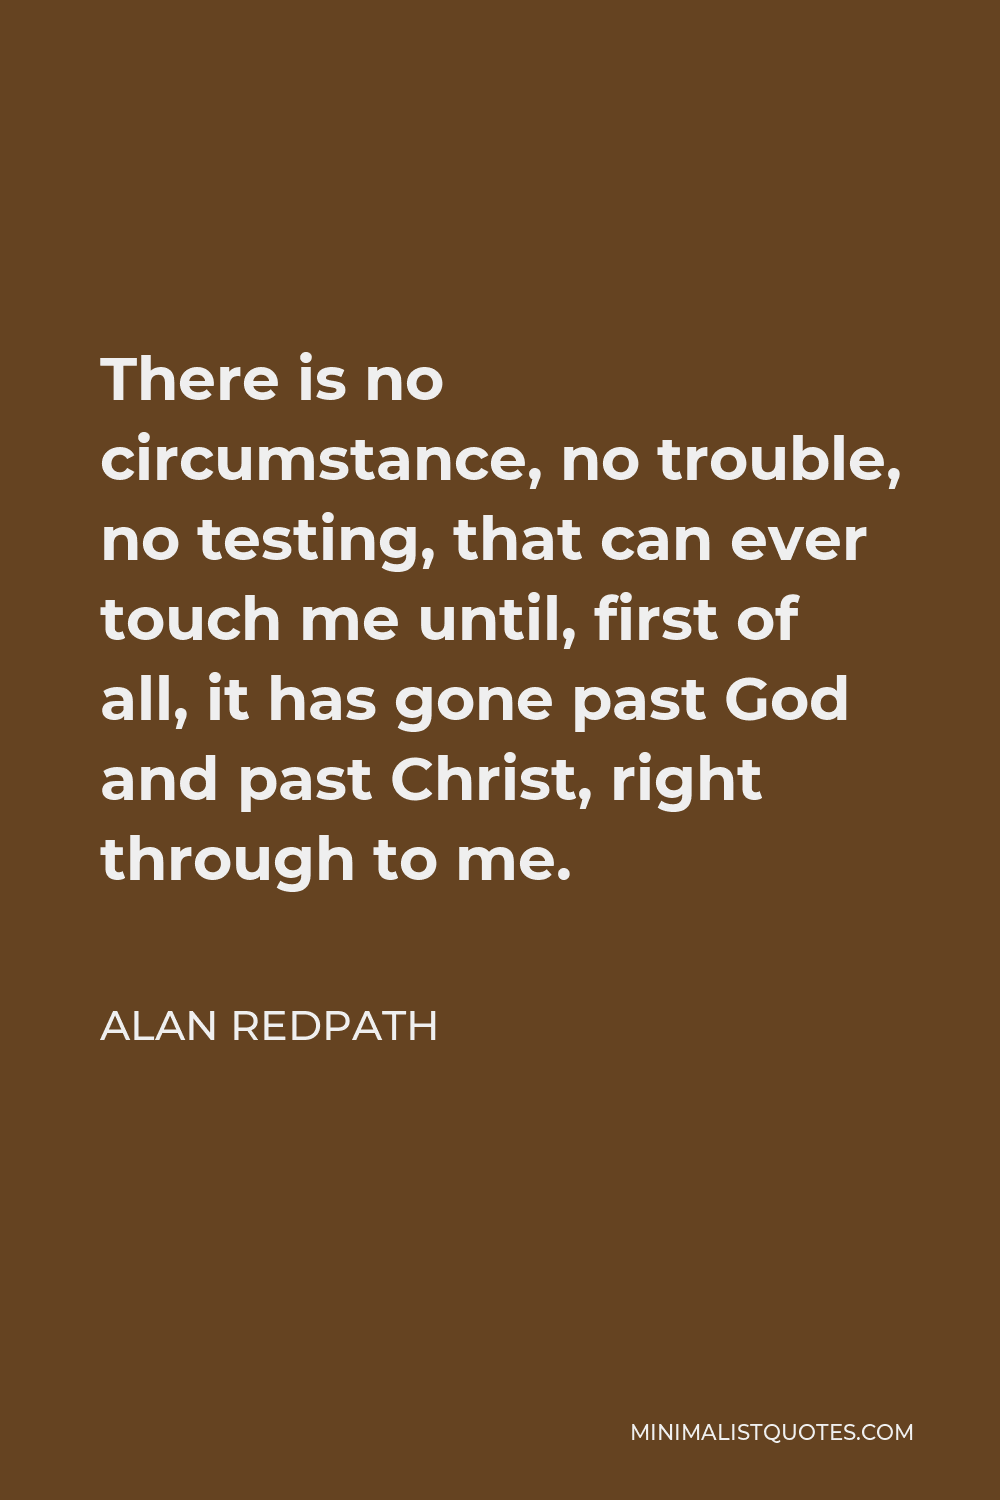 Alan Redpath Quote - There is no circumstance, no trouble, no testing, that can ever touch me until, first of all, it has gone past God and past Christ, right through to me.